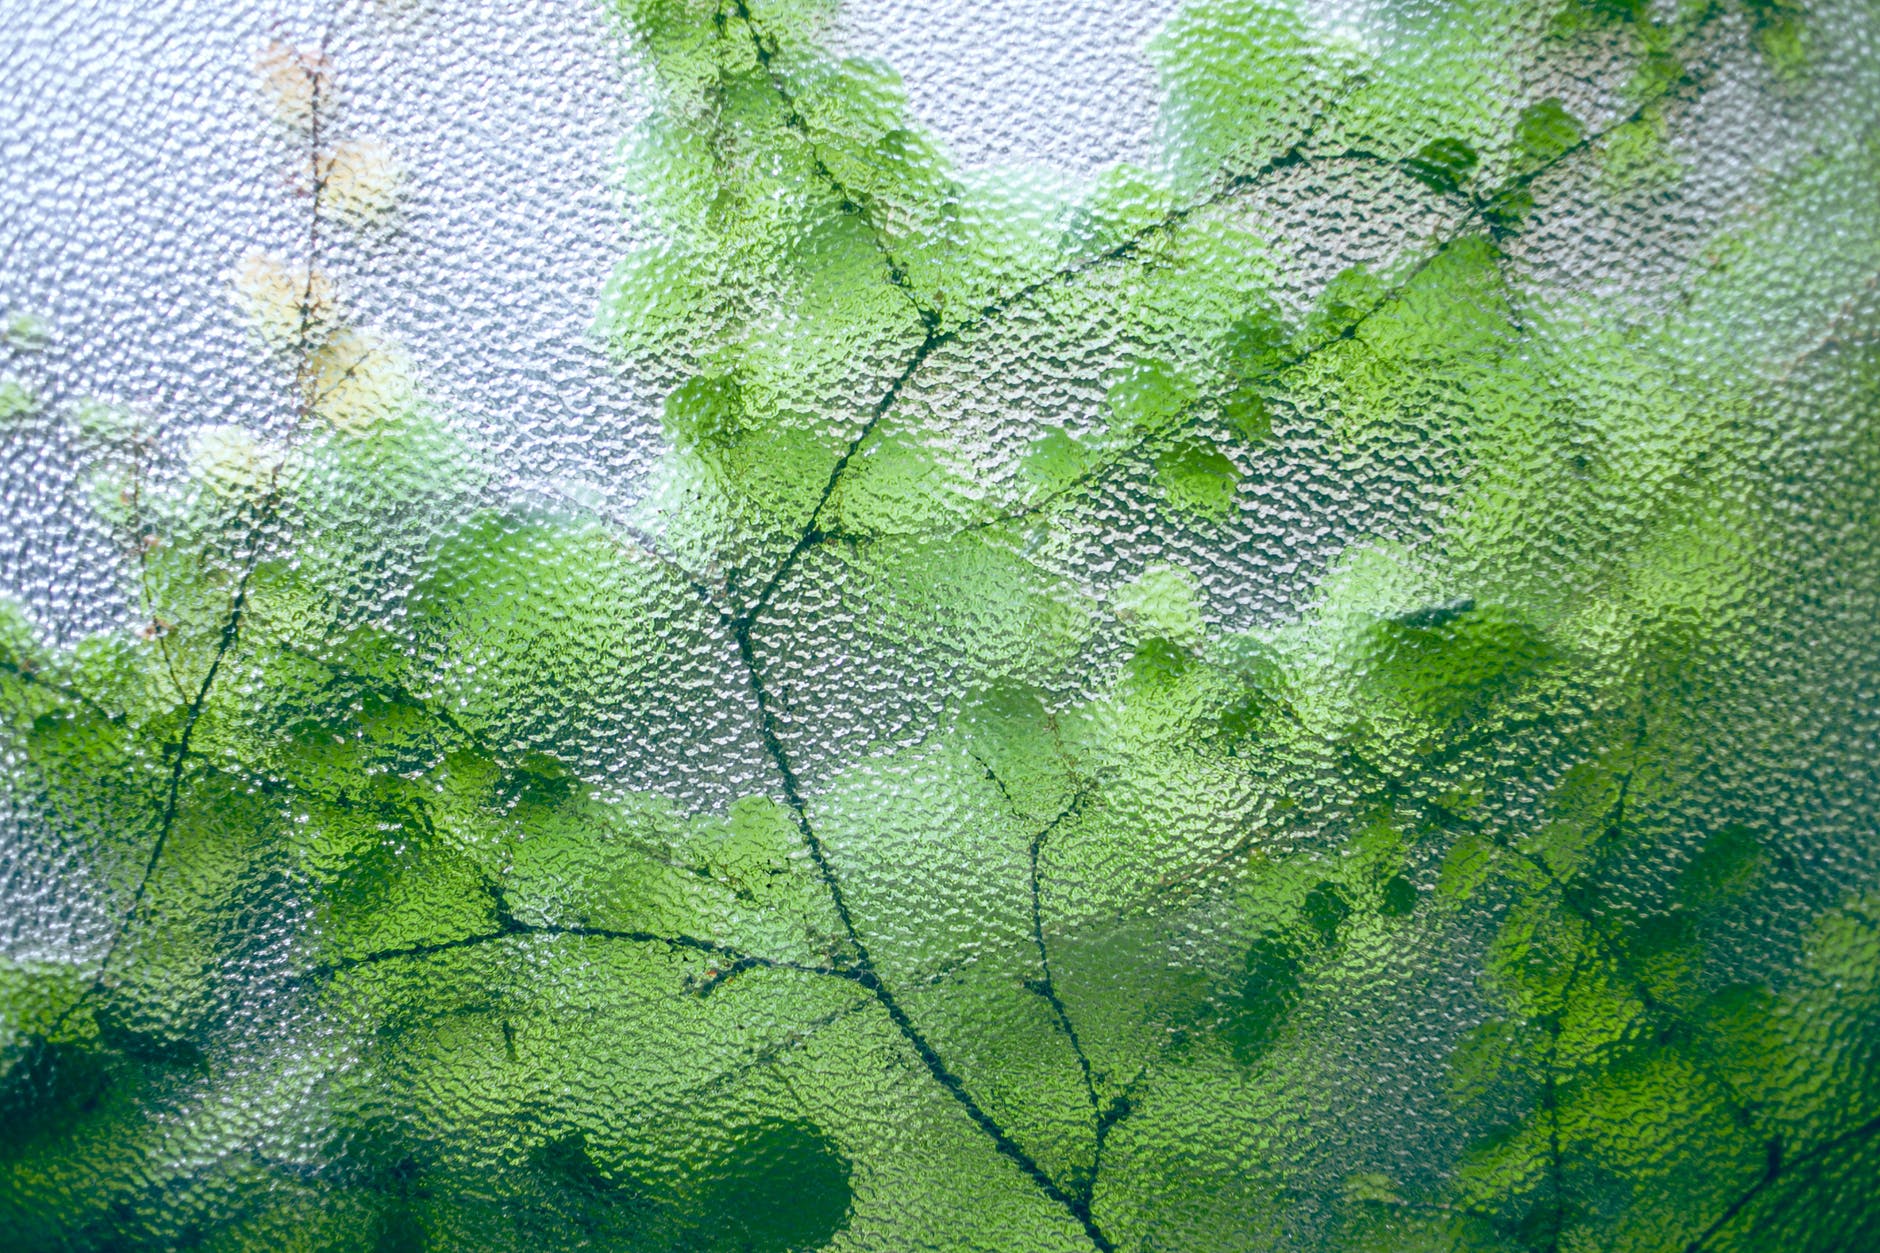 green plant on uneven glass surface